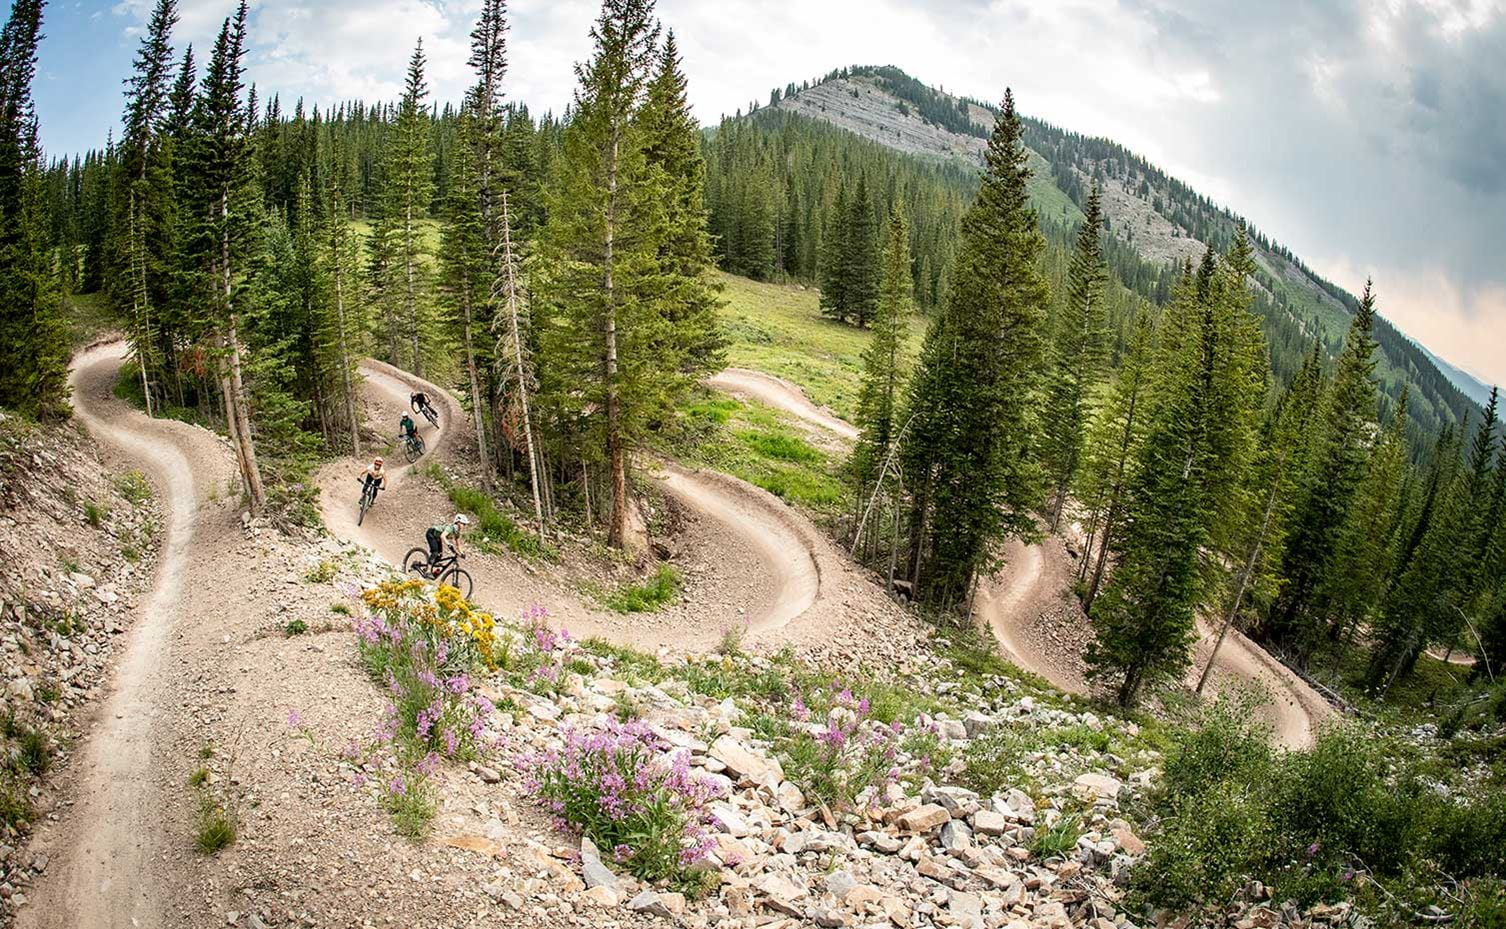 Snowmass Bike Park trails winding down the mountain